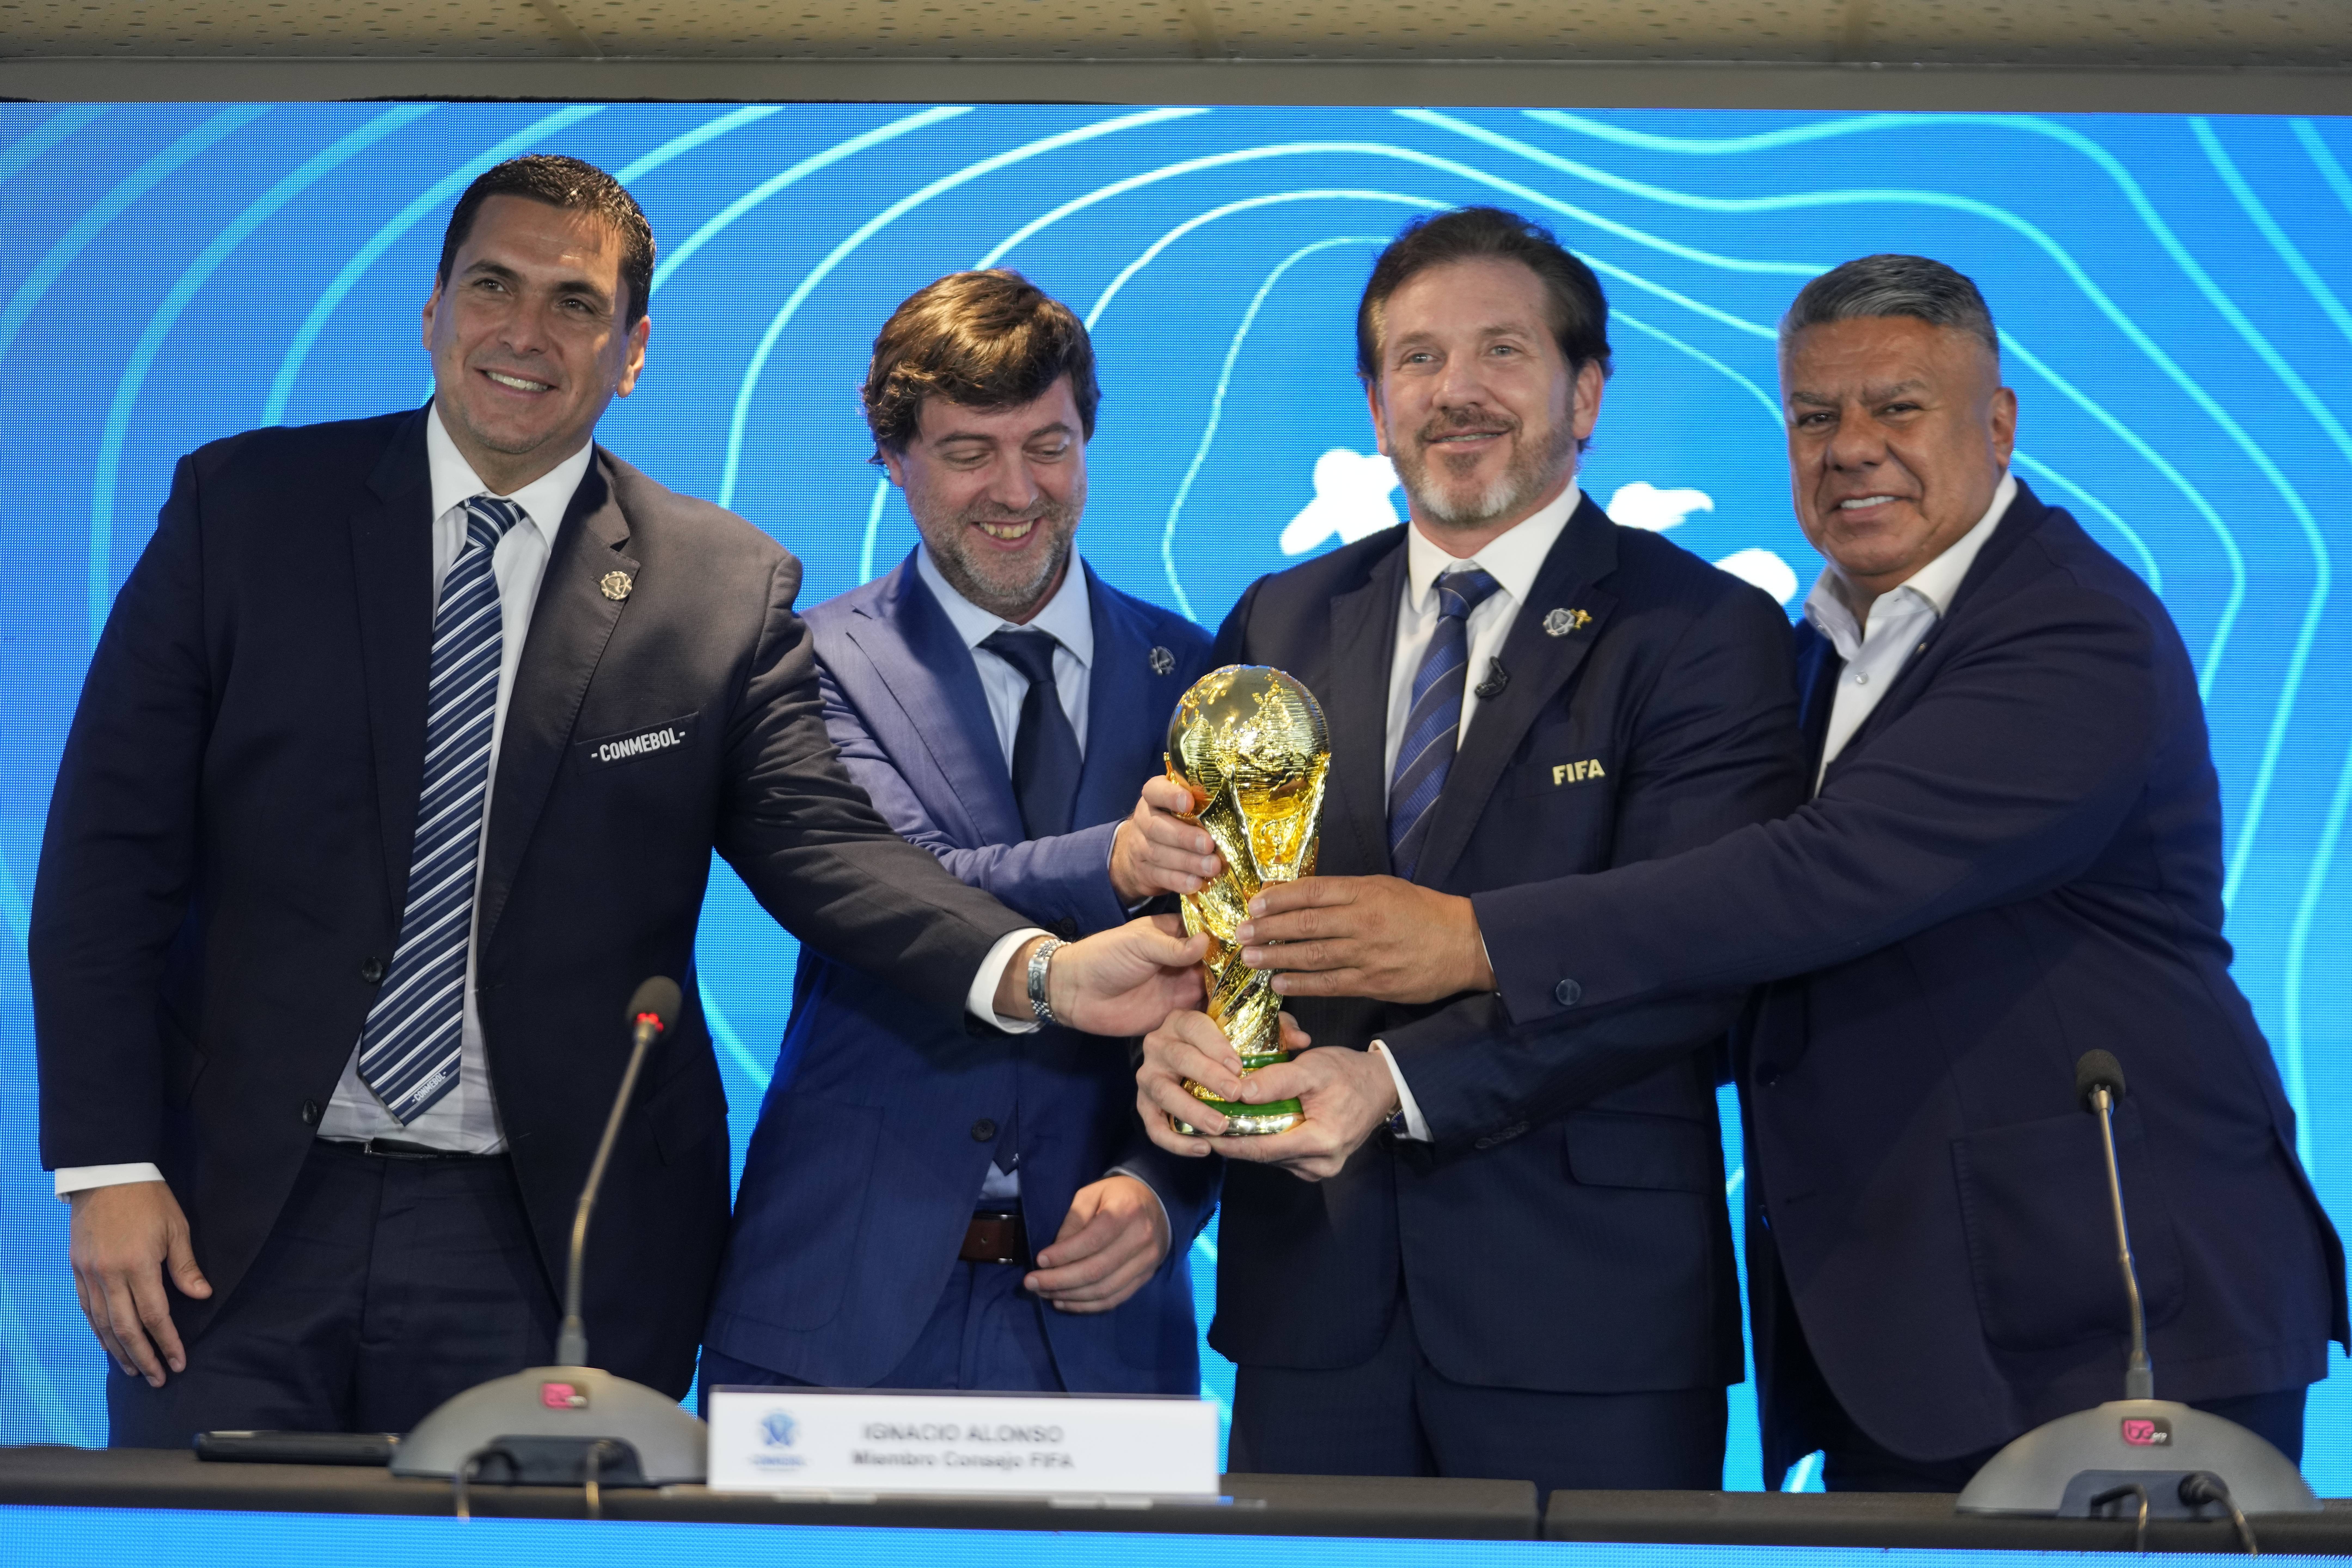 2030 FIFA World Cup hosts hail from Europe, Africa and South America